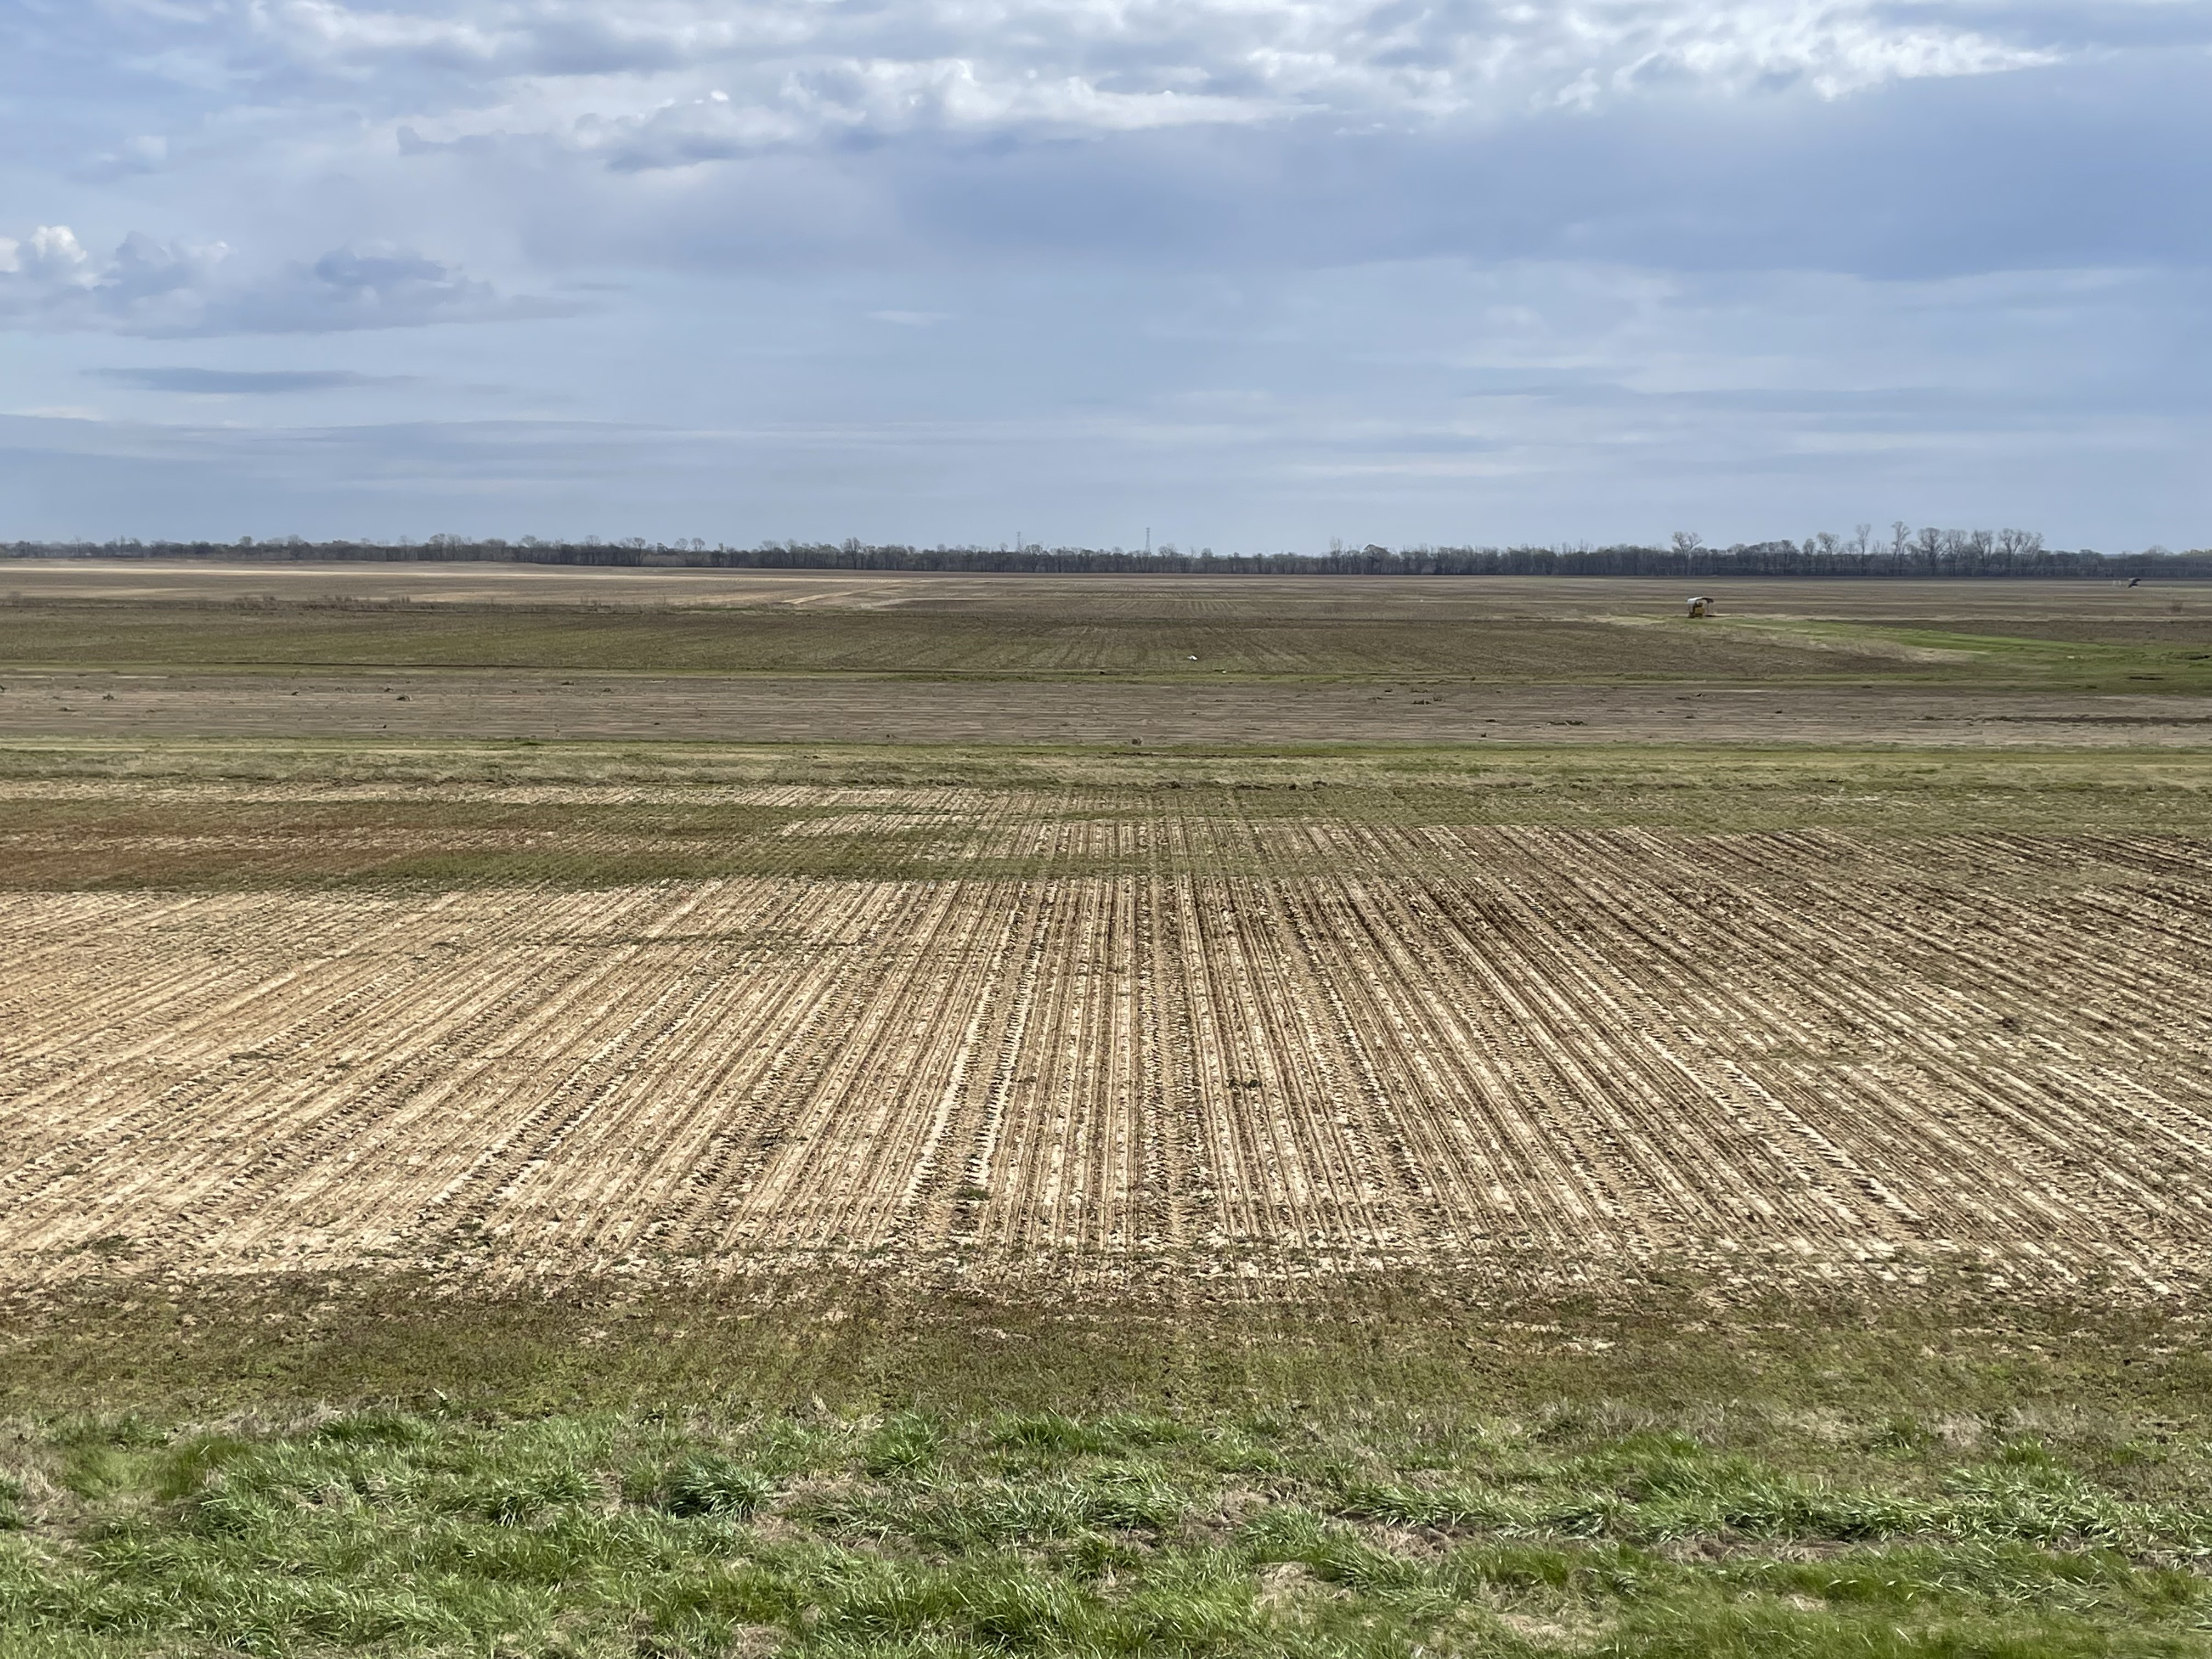 Open Rice field planted March 16 for cultivar and seeding rate trials at Lee Farm at the MU Delta Research Center, Portageville, Mo.